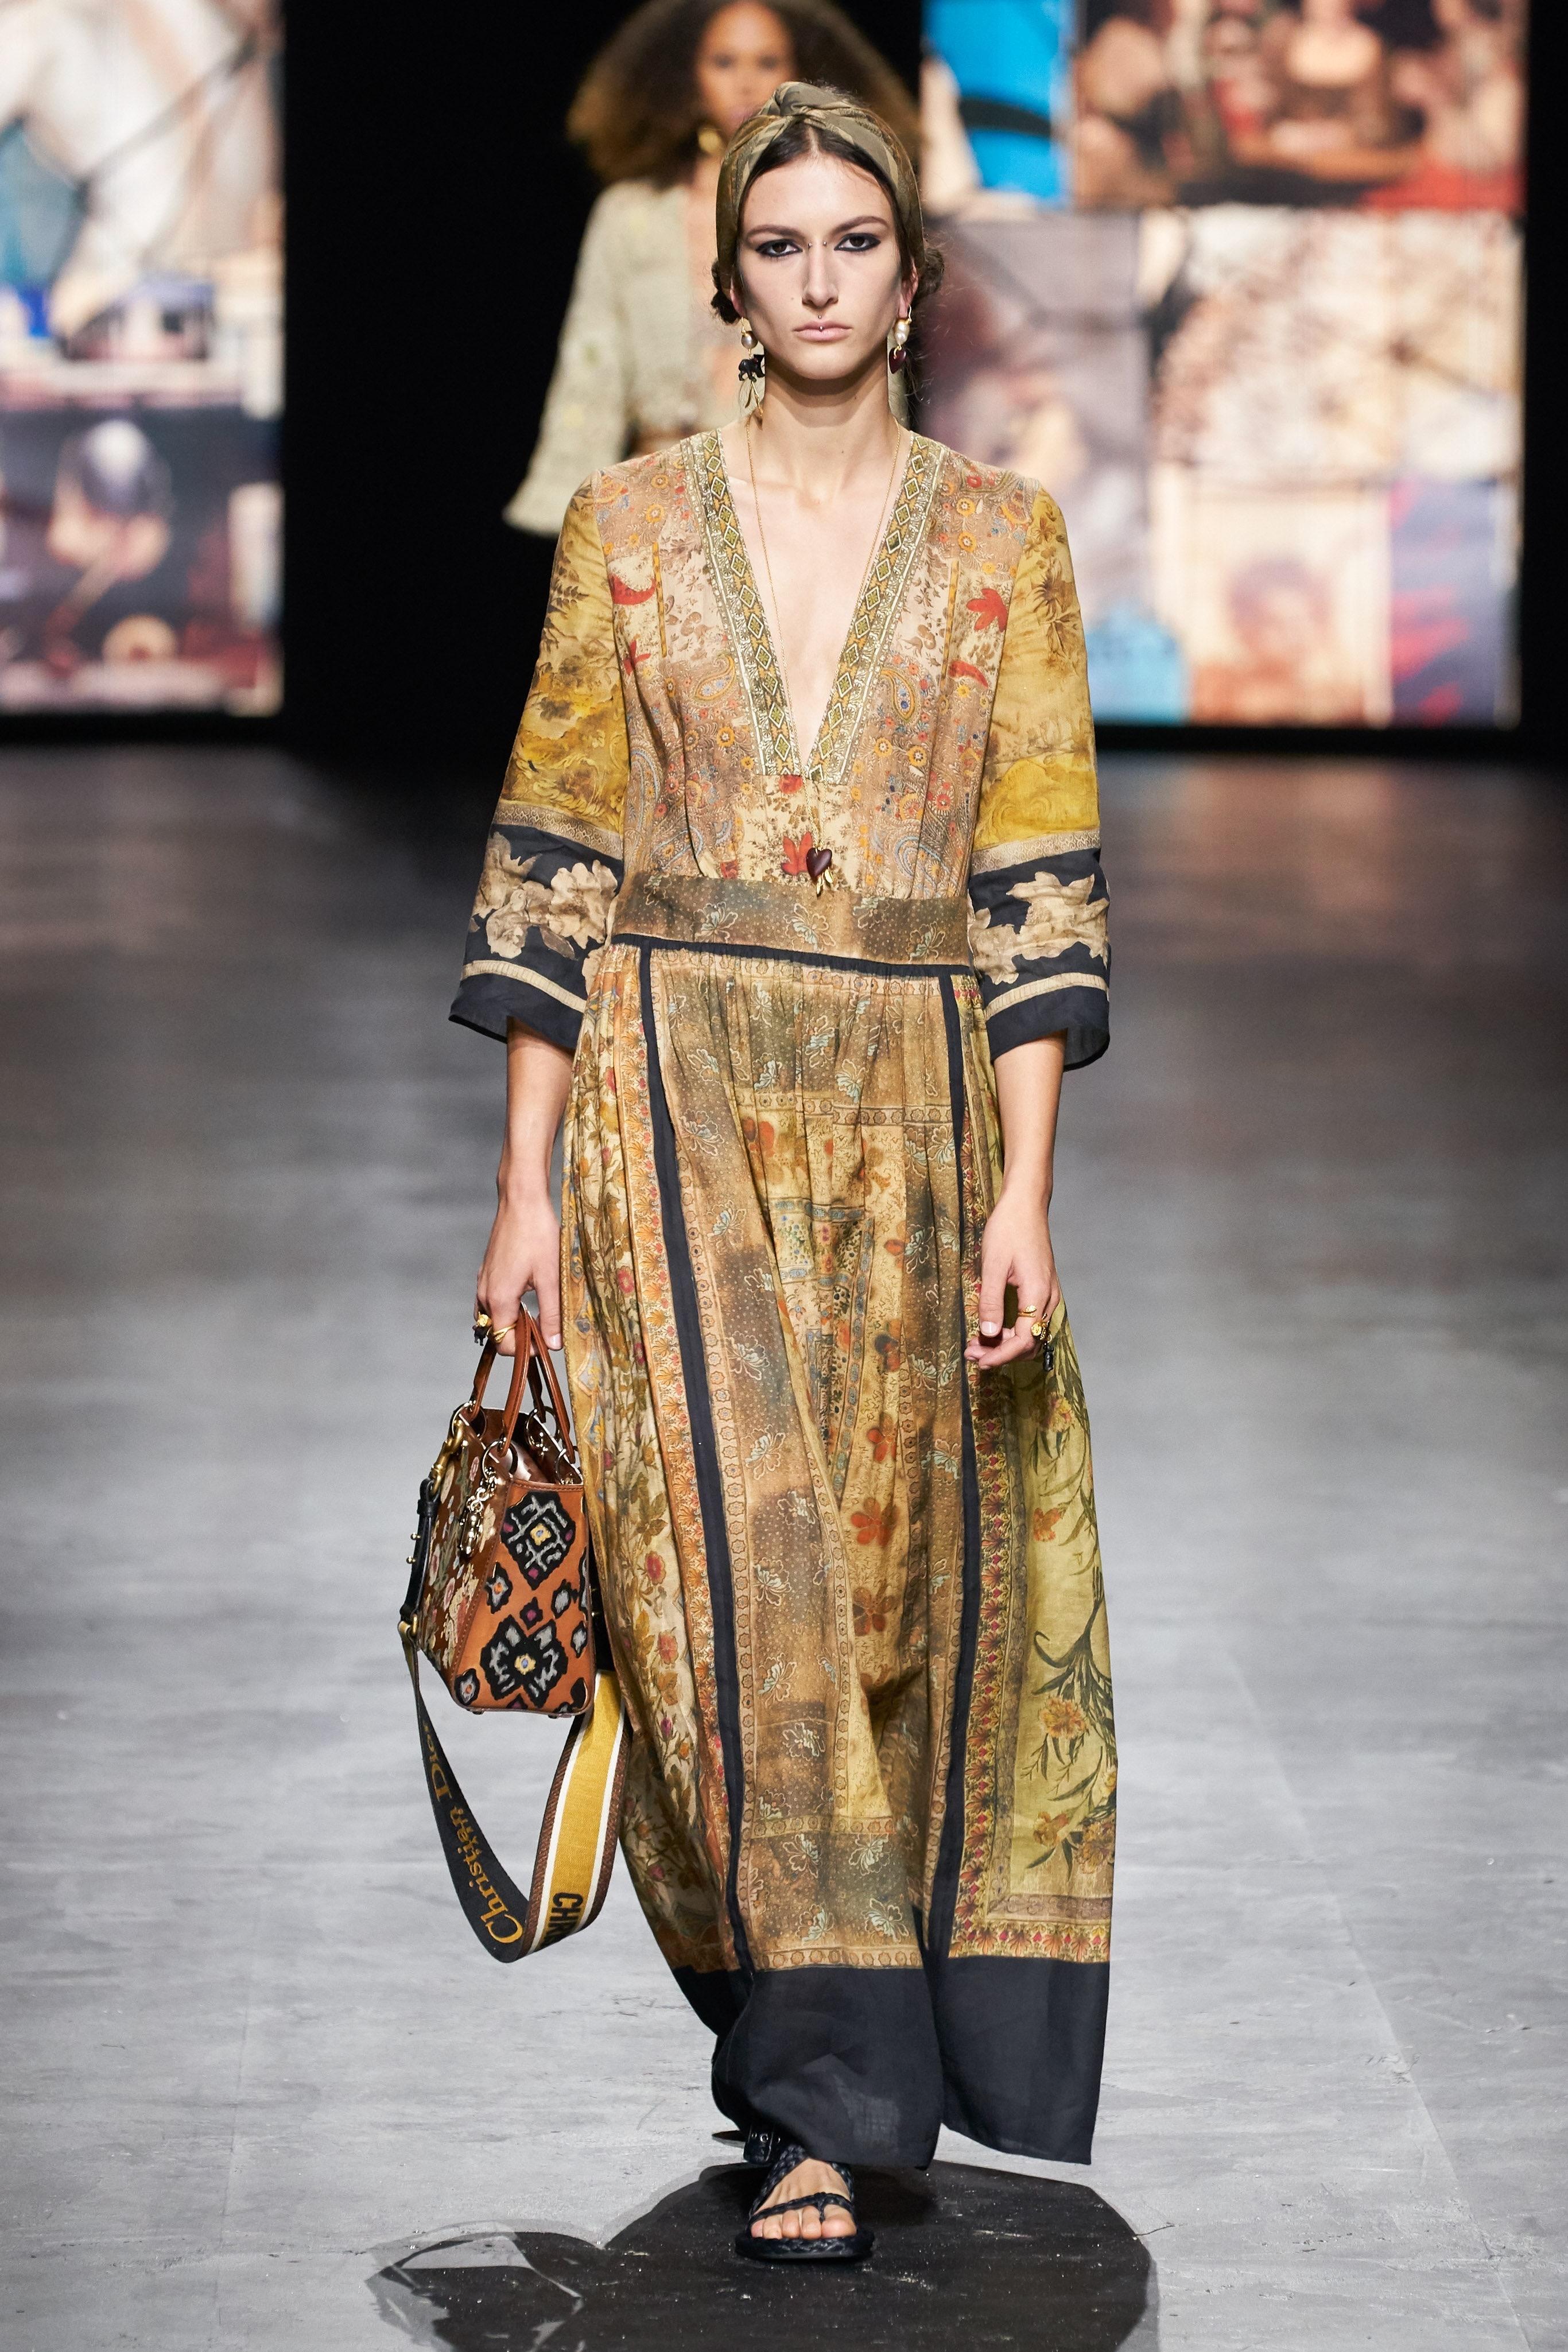 Beautiful Bohemian style maxi dress from the Spring 2021 Dior Collection.
It is crafted in a beautiful woven silk, delicate on the skin and perfect for the looks !
Retail price: €4'200 

Collection: Spring 2021
Fabric: 100% silk
Color: earth tone